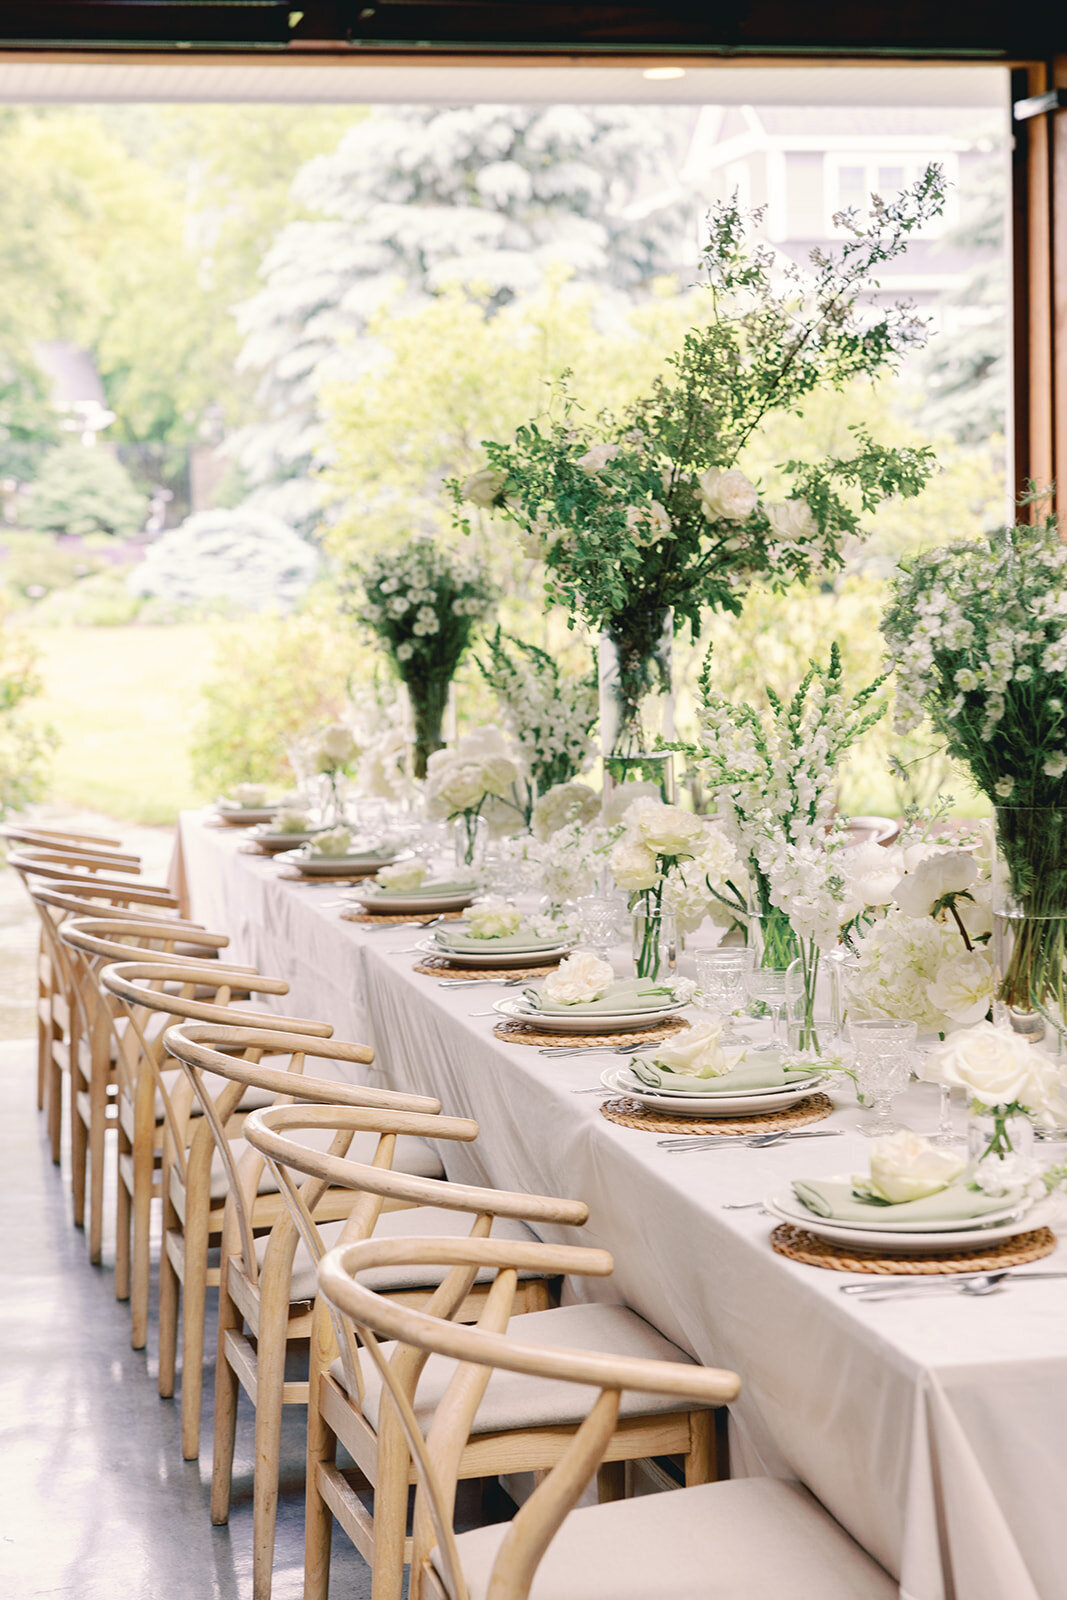 Table setting with white tablecloth and white and green floral centerpieces